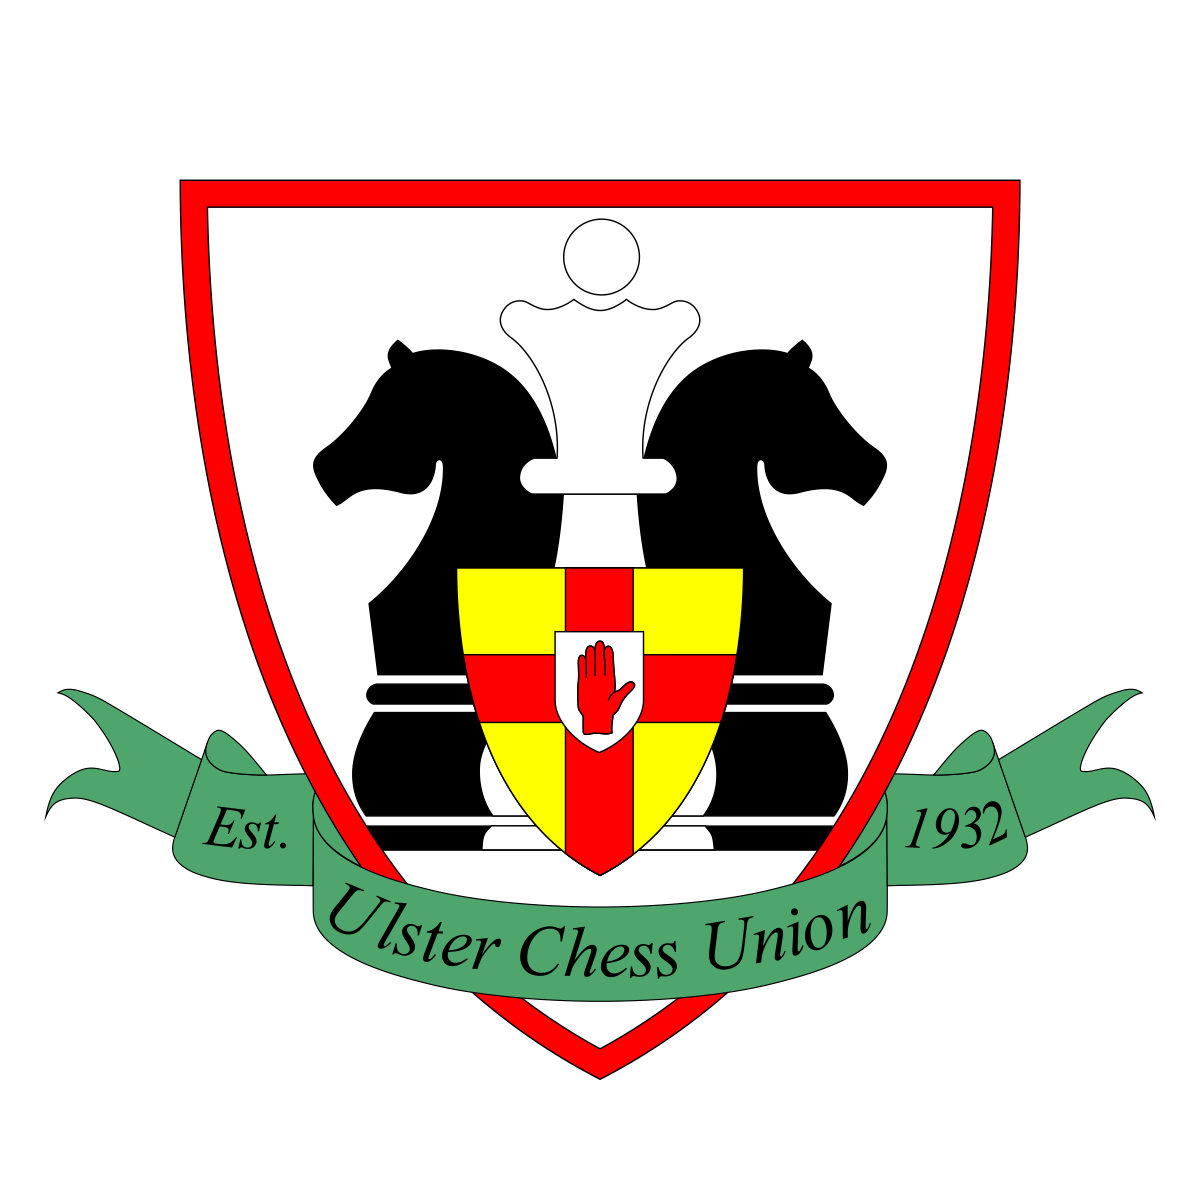 Children's Chess in conjunction with the Ulster Chess Union